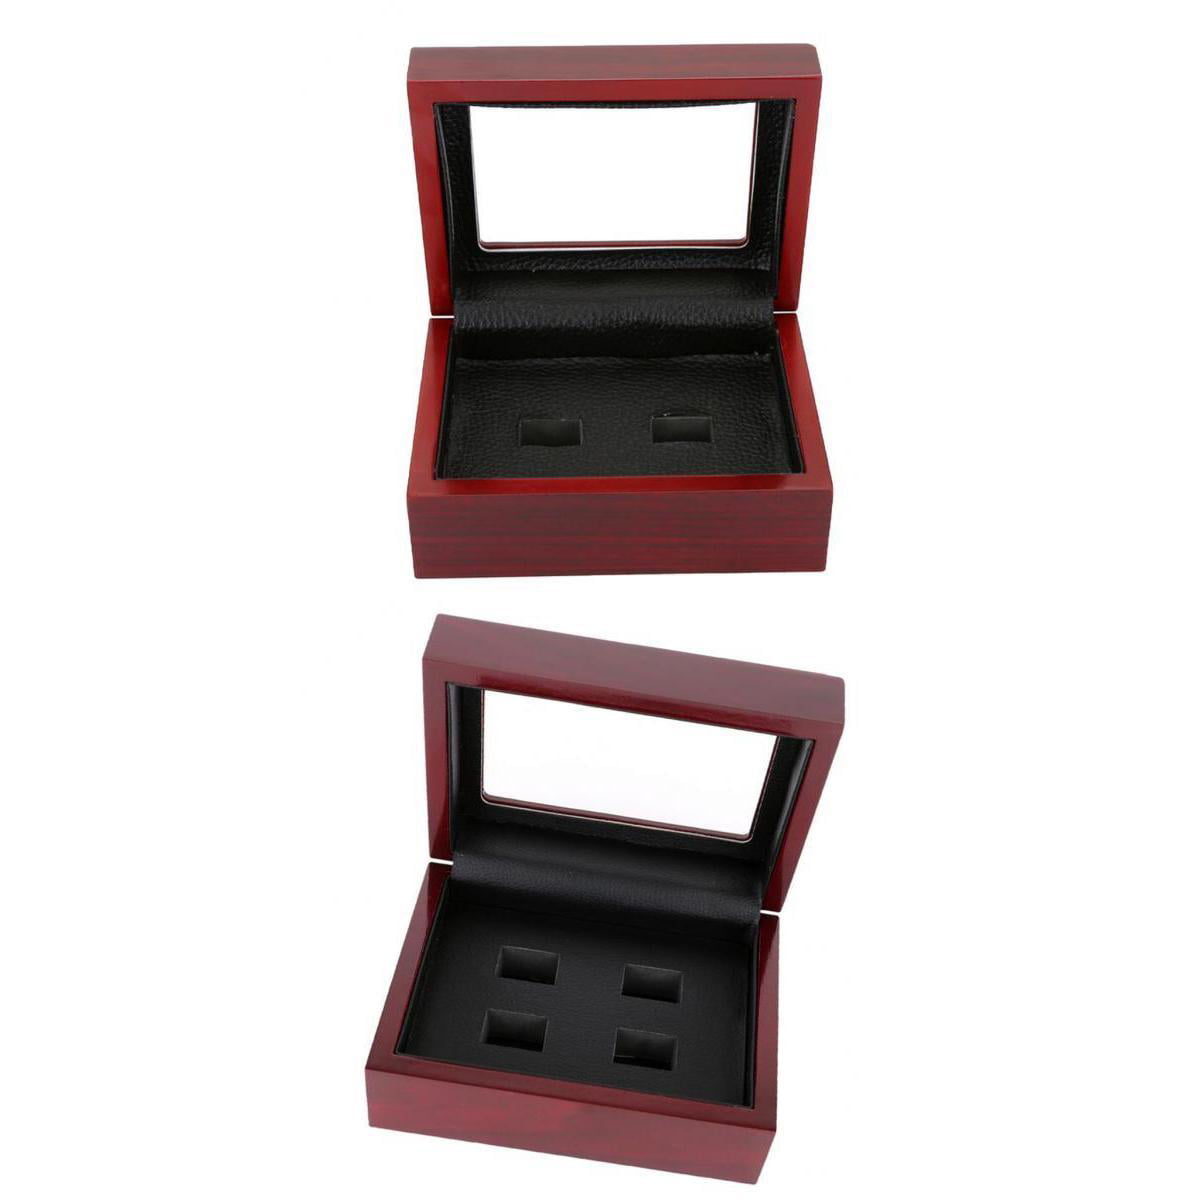 12 Holes Championship Rings Trophy Display Collection Case Wood Box Wine Red 